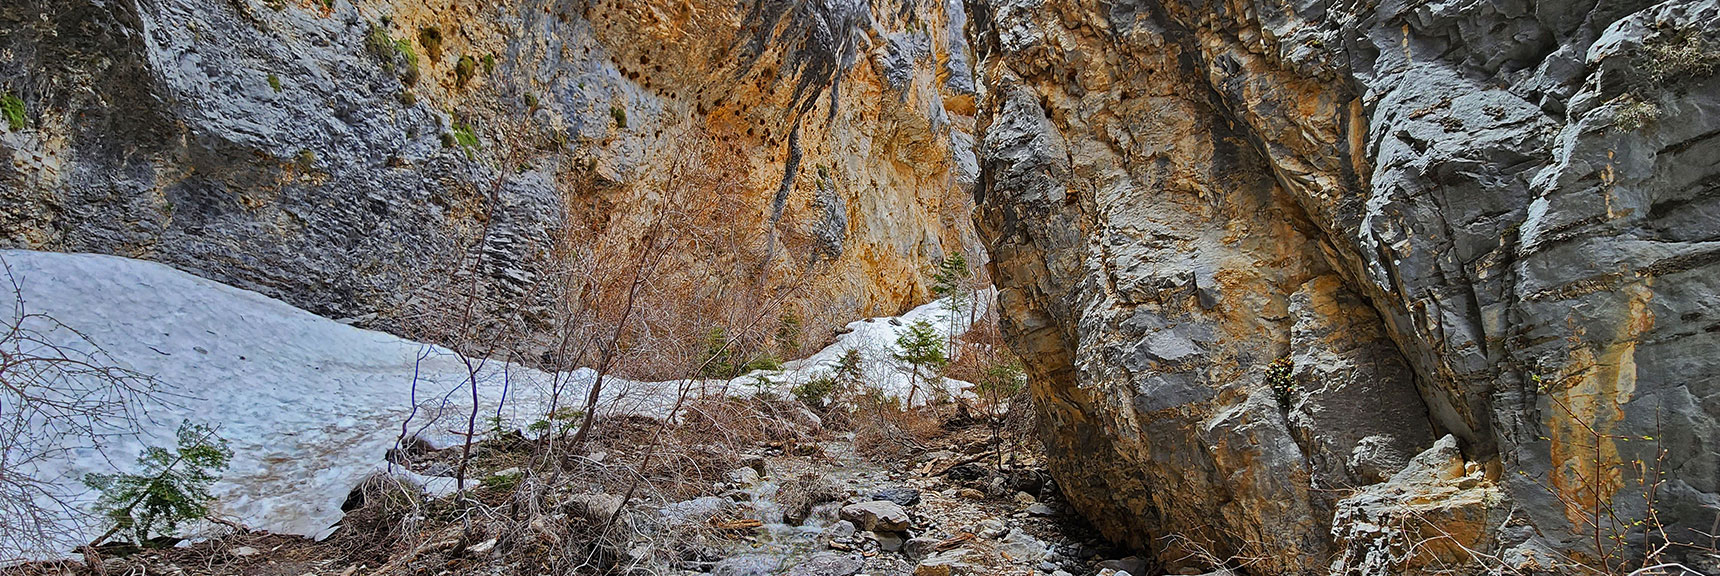 The Canyon Further Narrows, Walls Rising Vertically on Either Side | Fletcher Canyon Trail | Mt Charleston Wilderness | Spring Mountains, Nevada